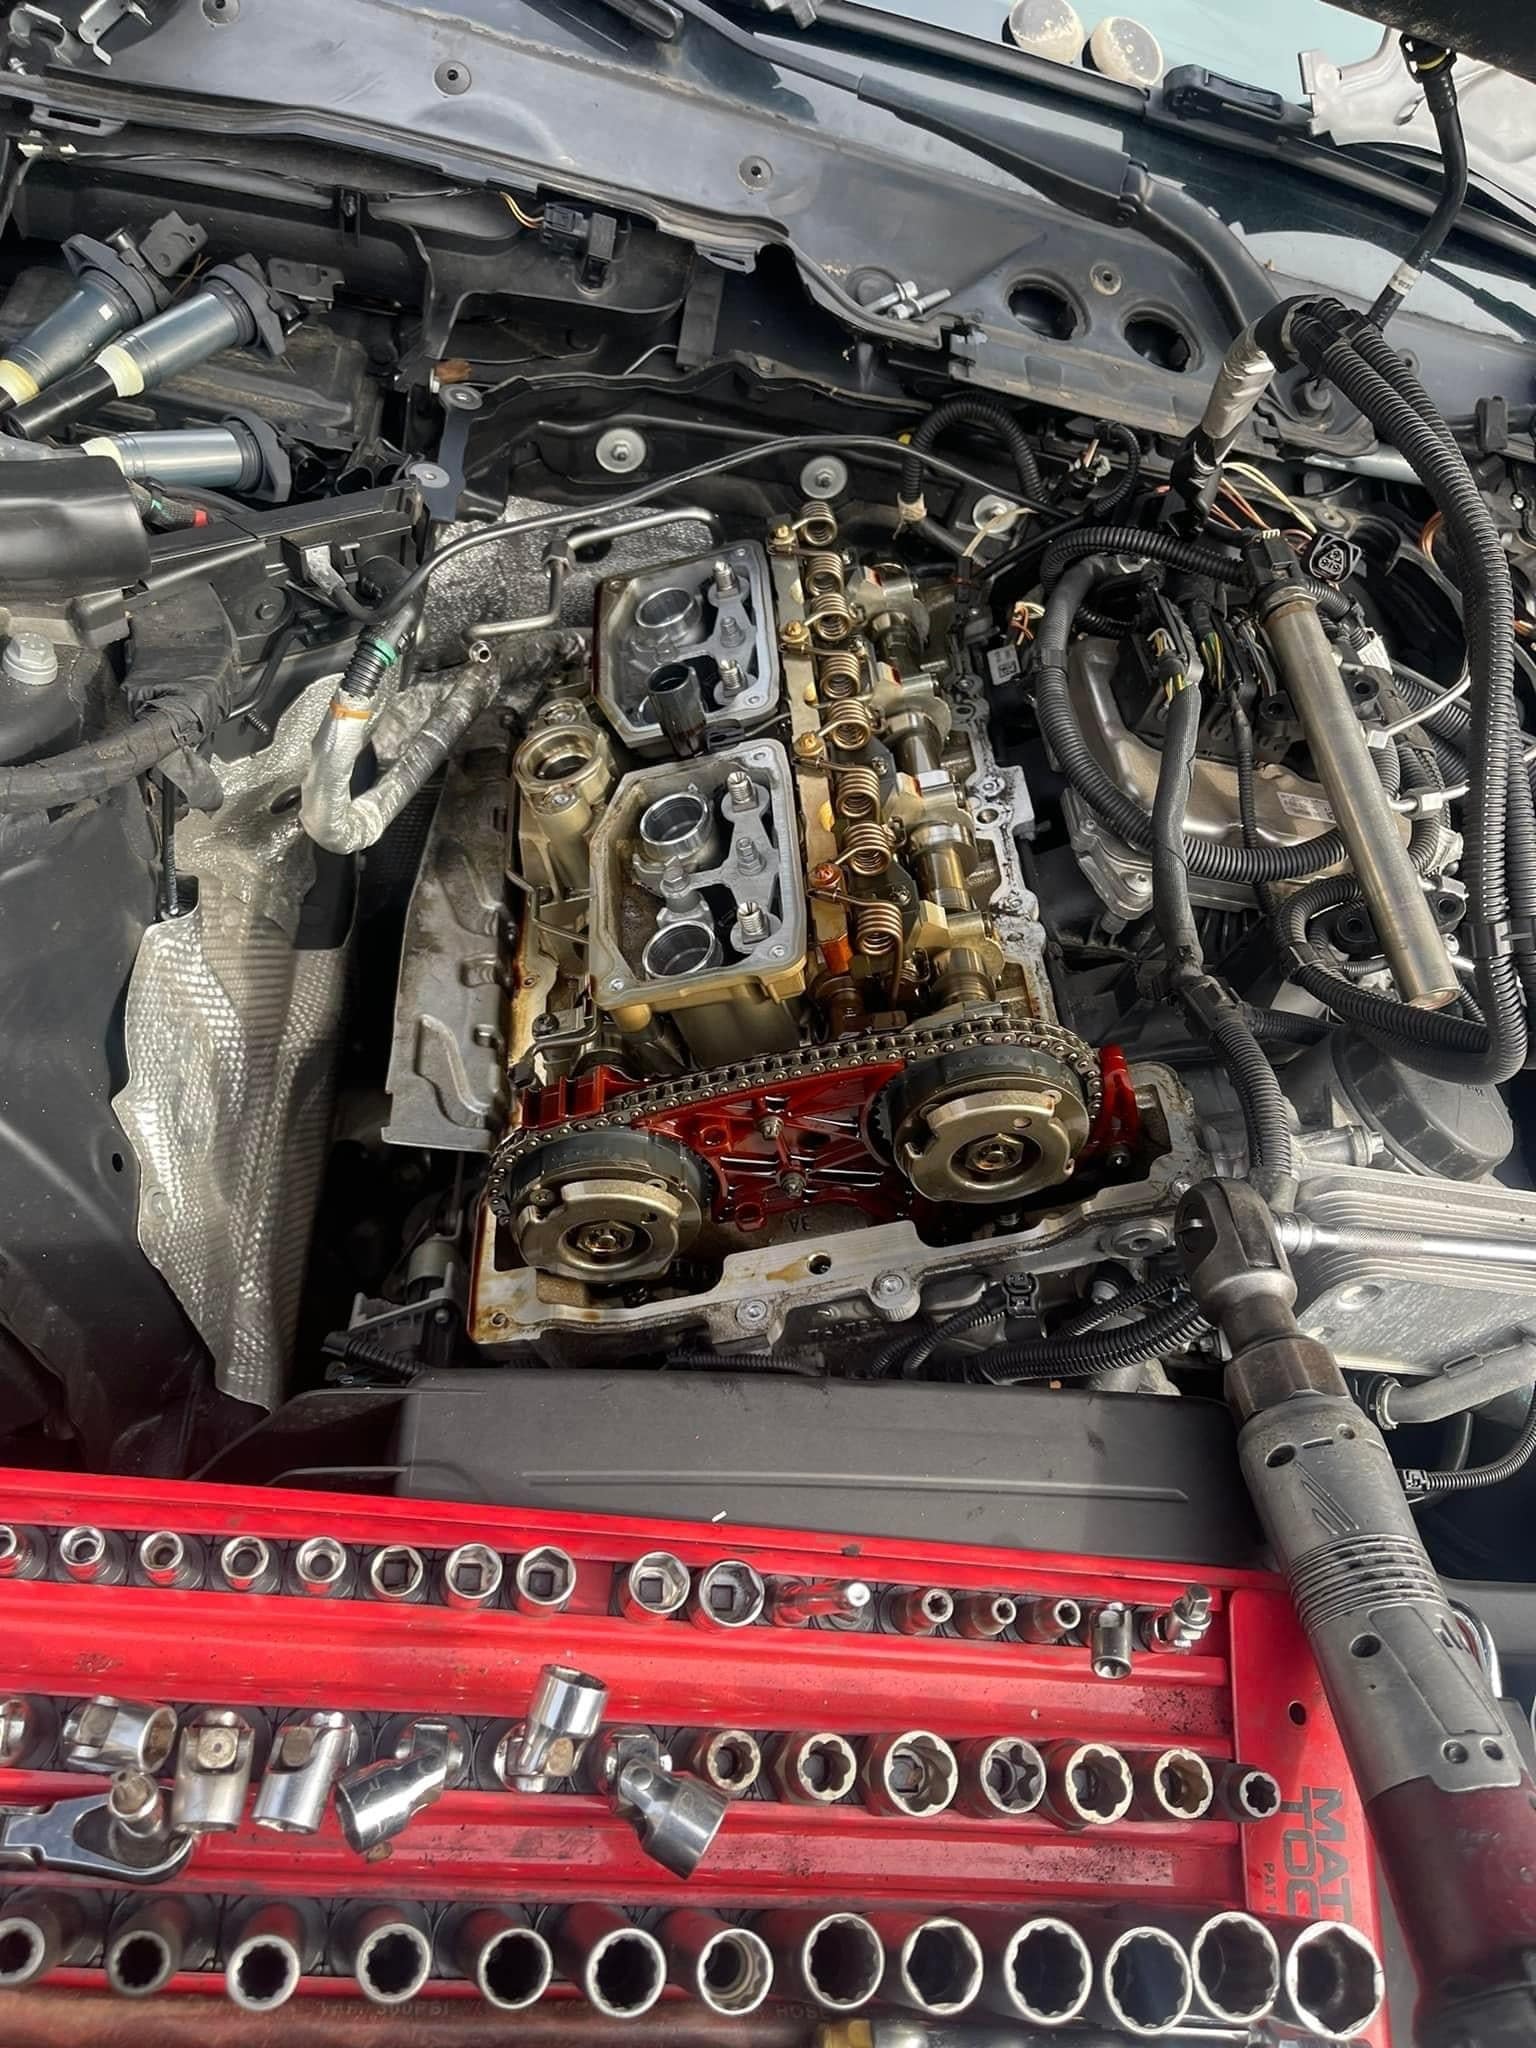 replacing the valve cover